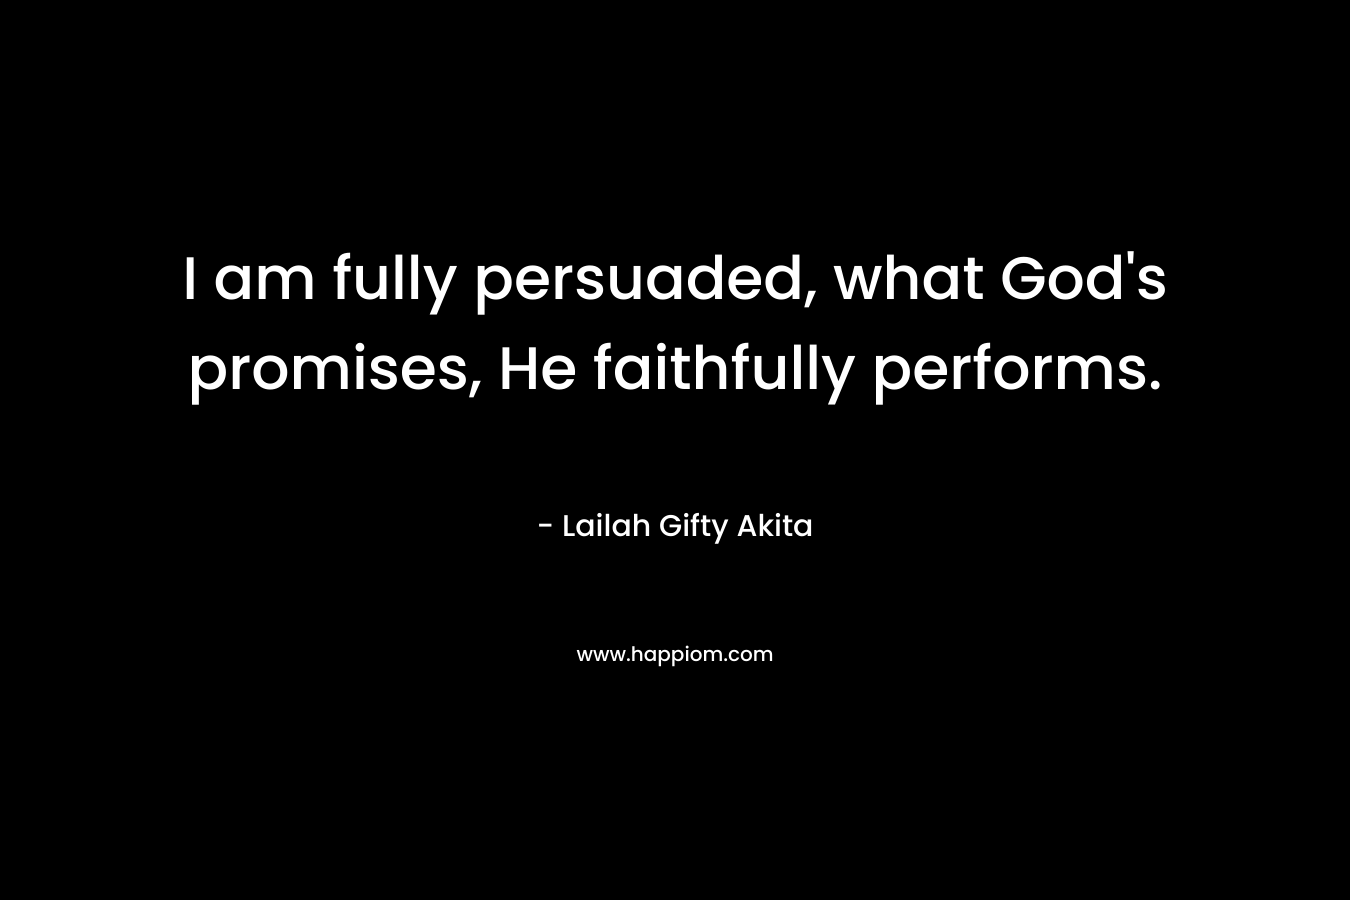 I am fully persuaded, what God’s promises, He faithfully performs. – Lailah Gifty Akita